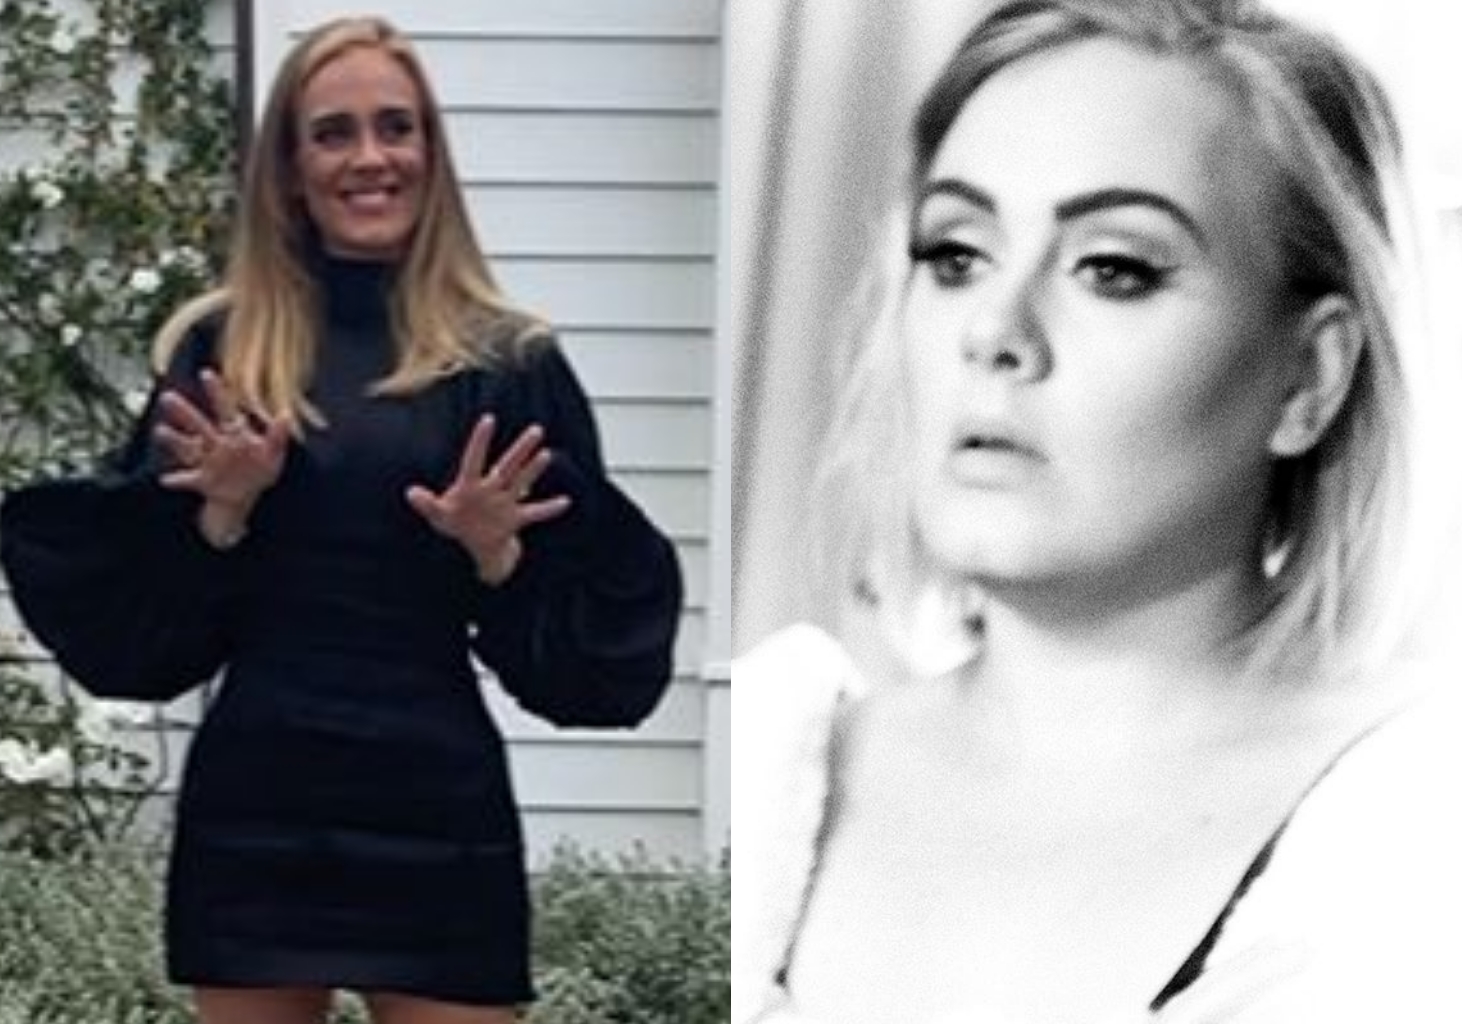 "That Waist is snatched" – Adele shows off her snatch physique, fans reacts (Photos)